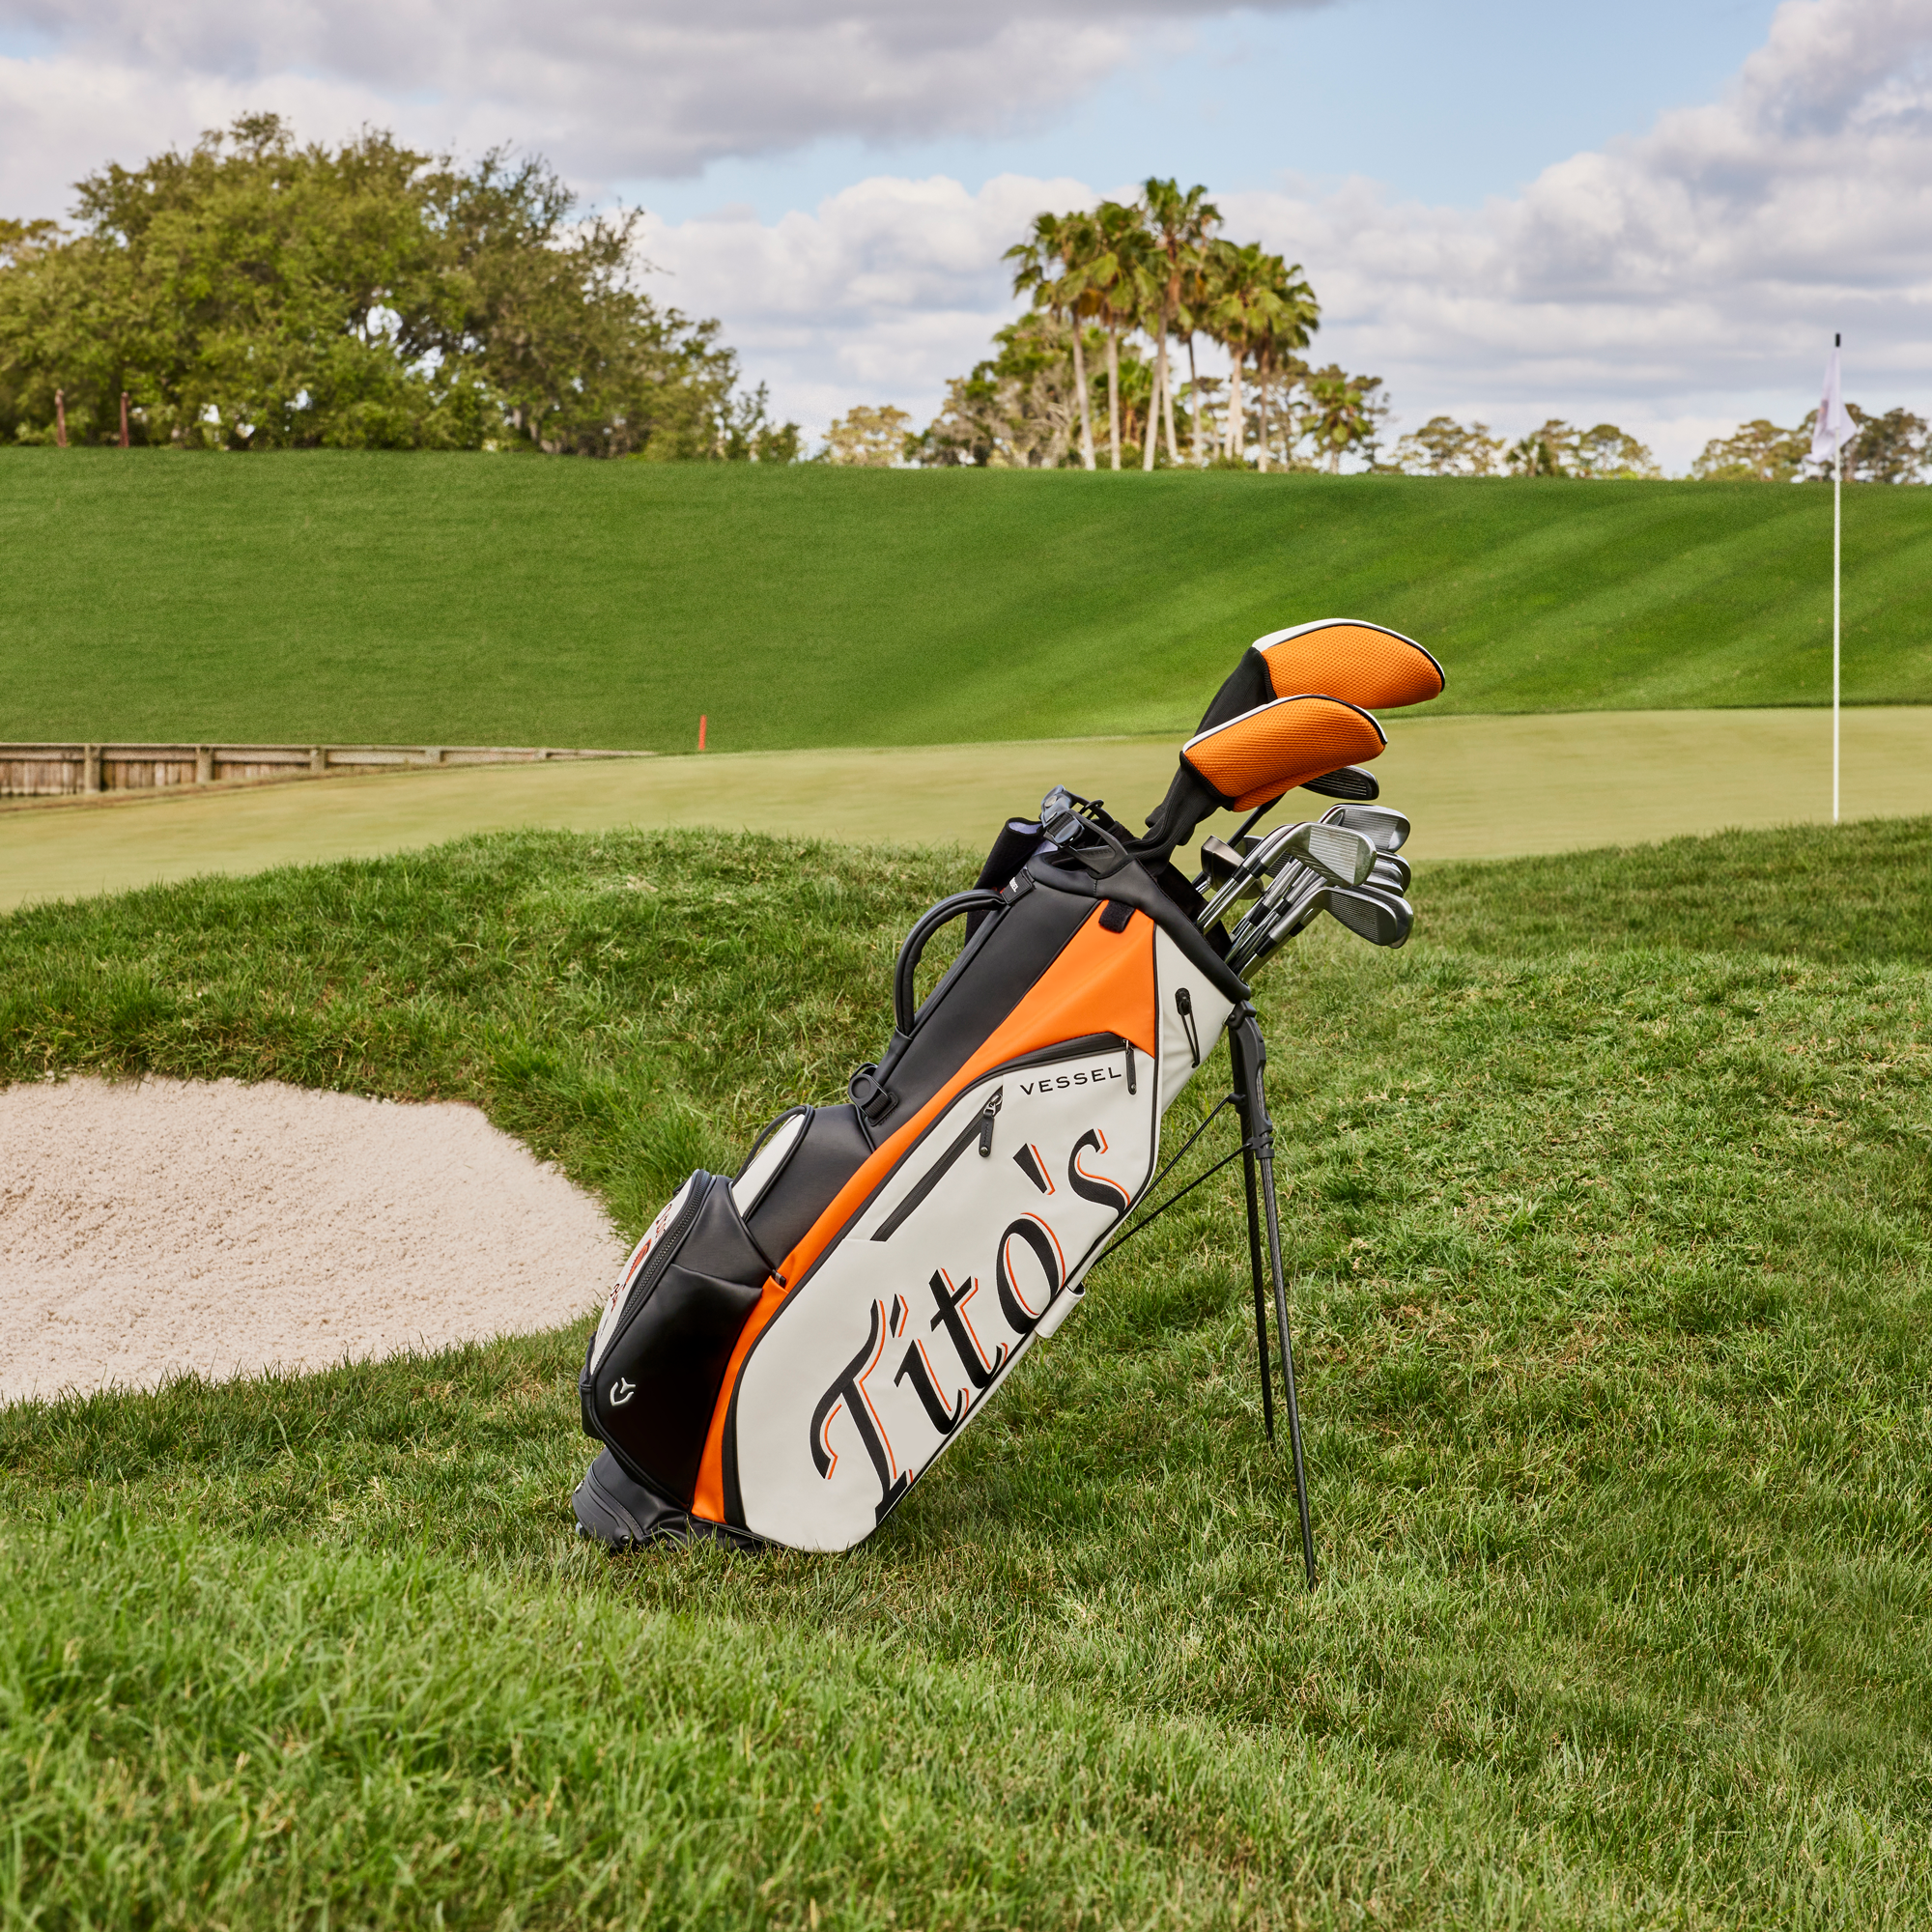 Vessel Golf Bags: Great Bags for a Great Cause - GolfThreads